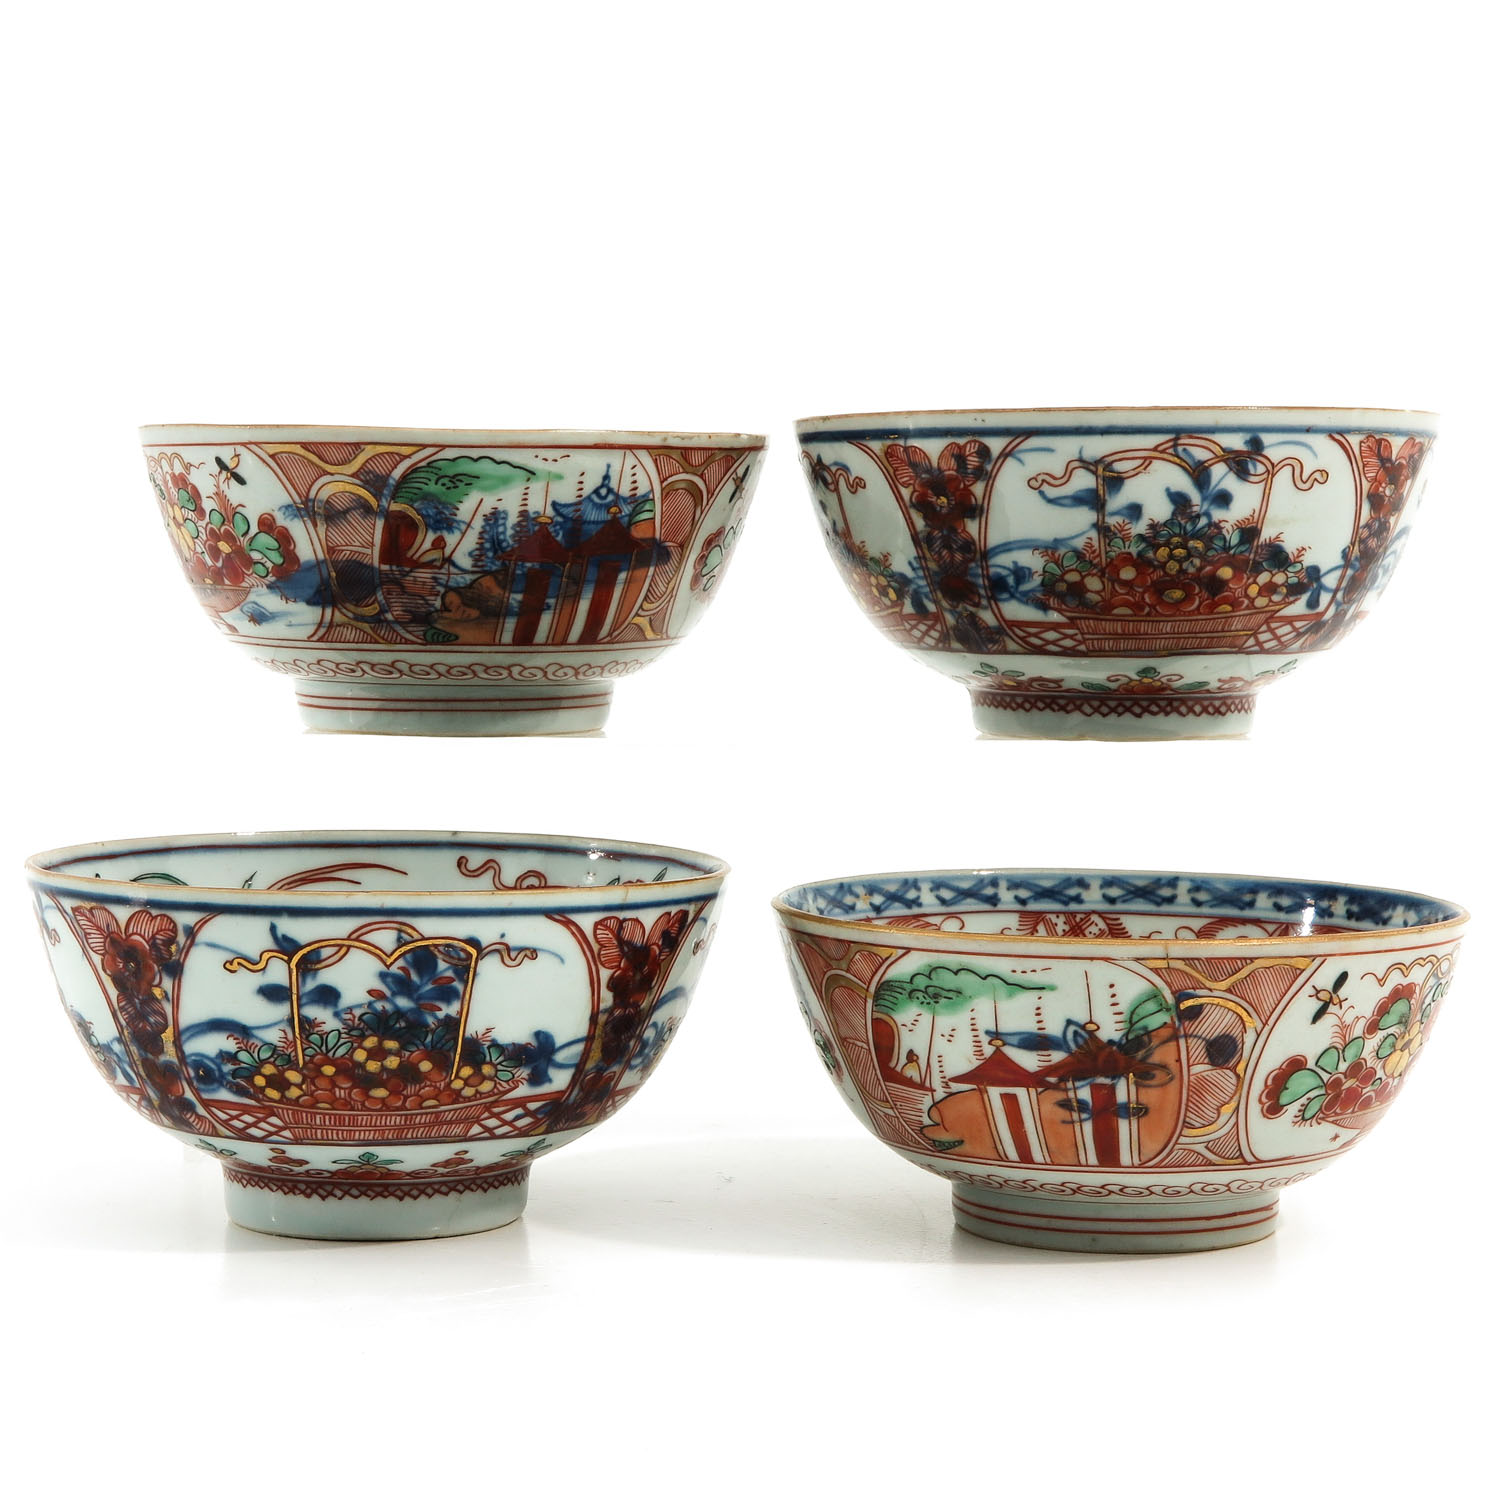 A Series of 4 Bowls - Image 4 of 10